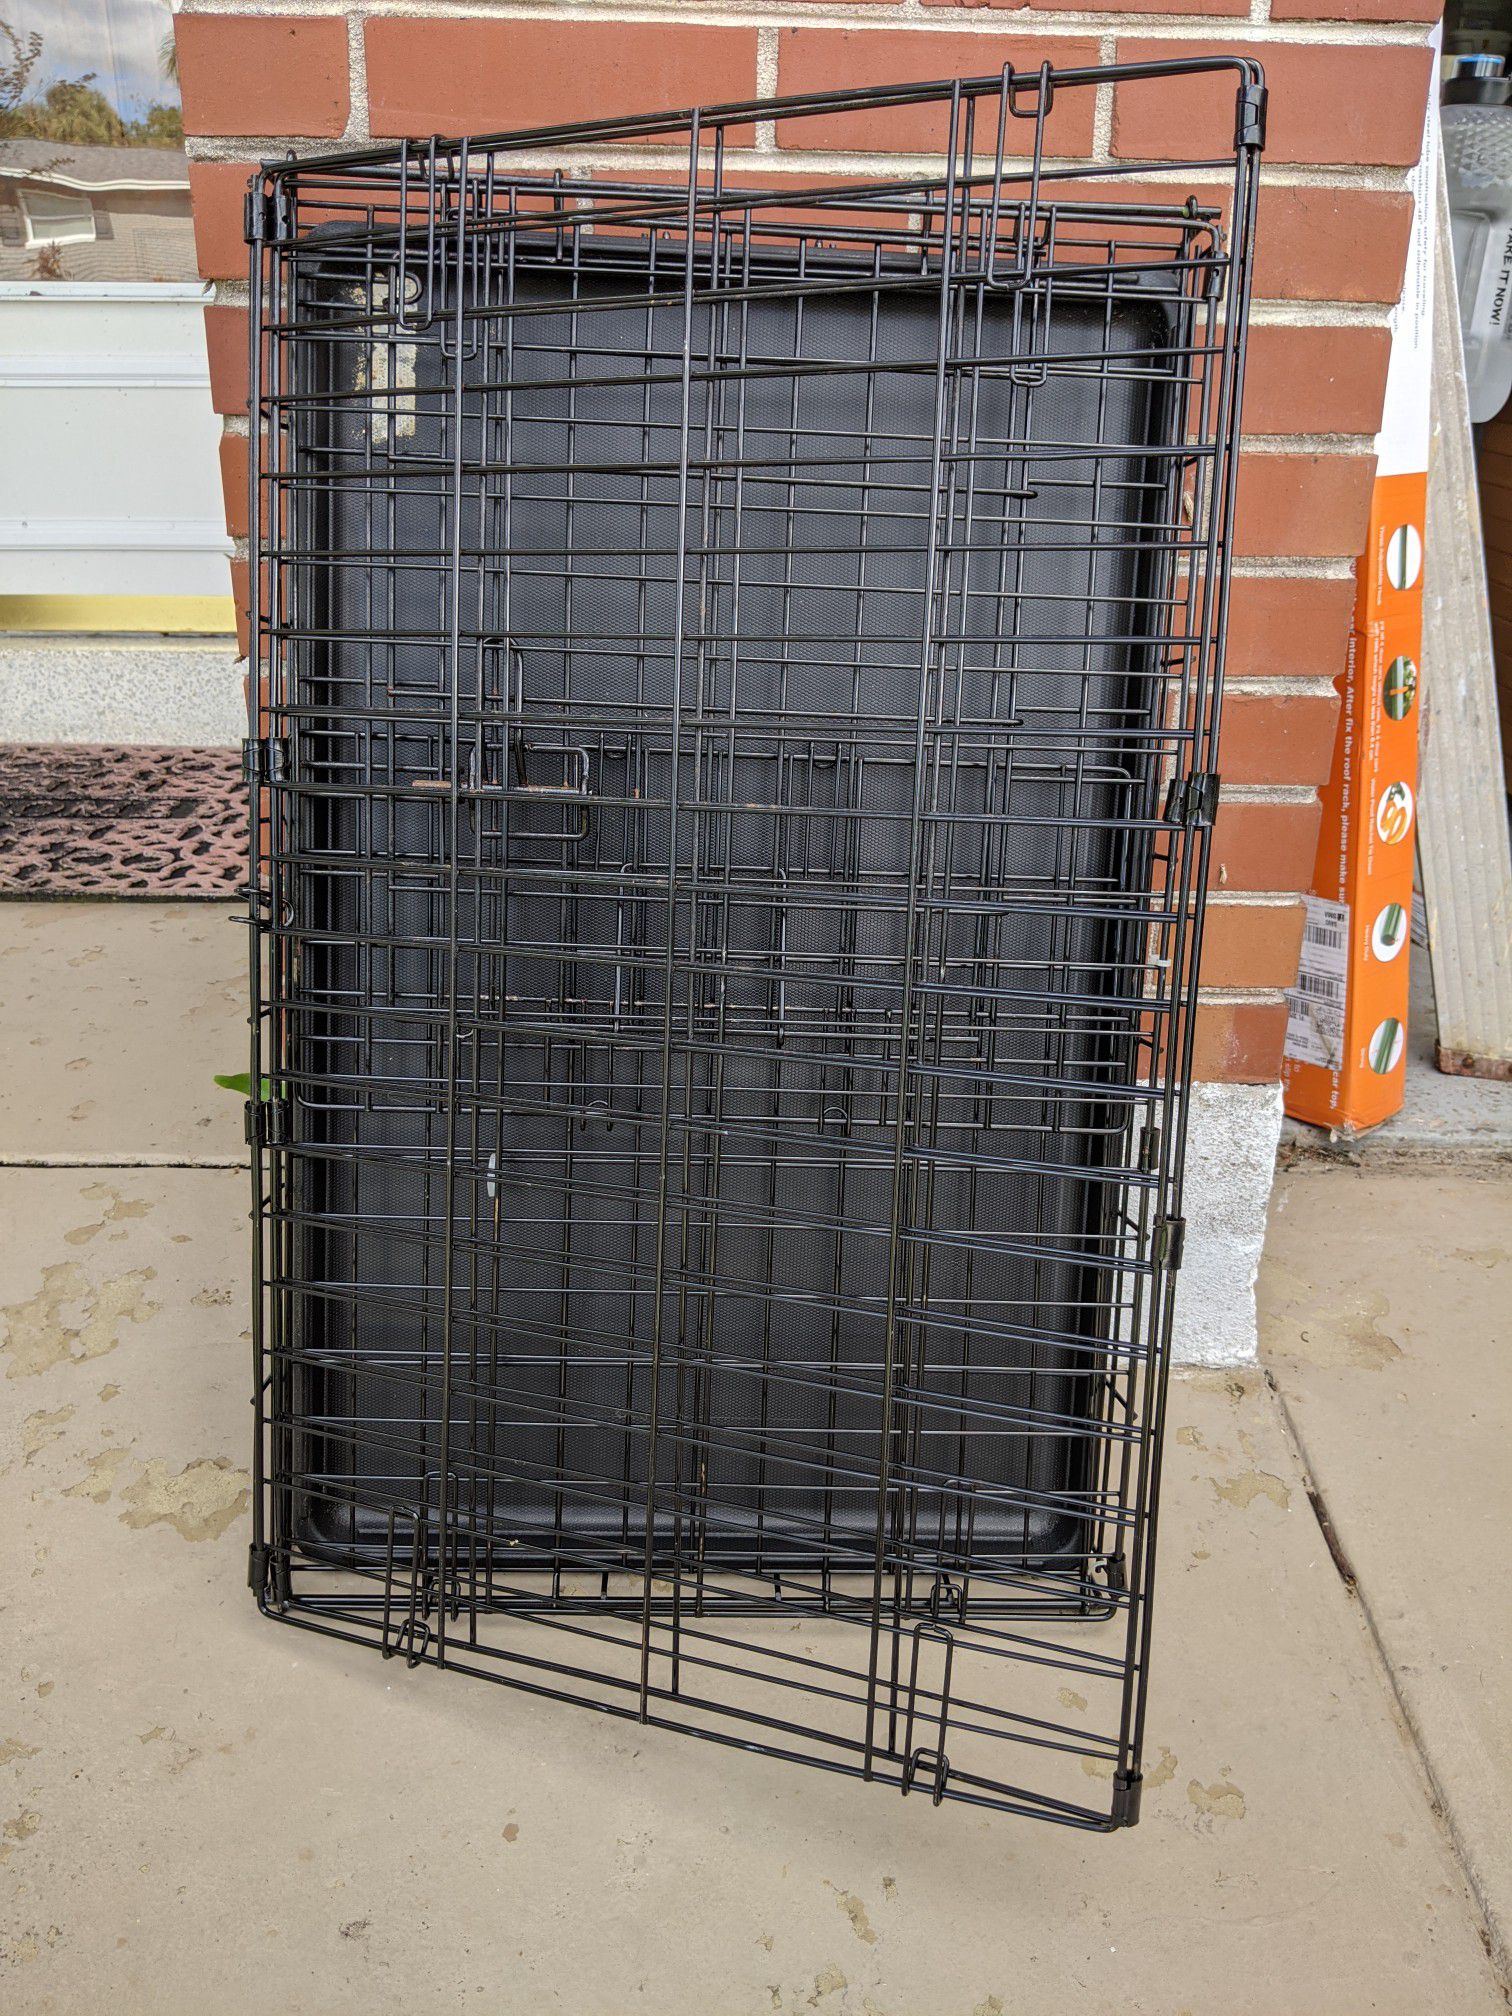 Collapsible animal crate